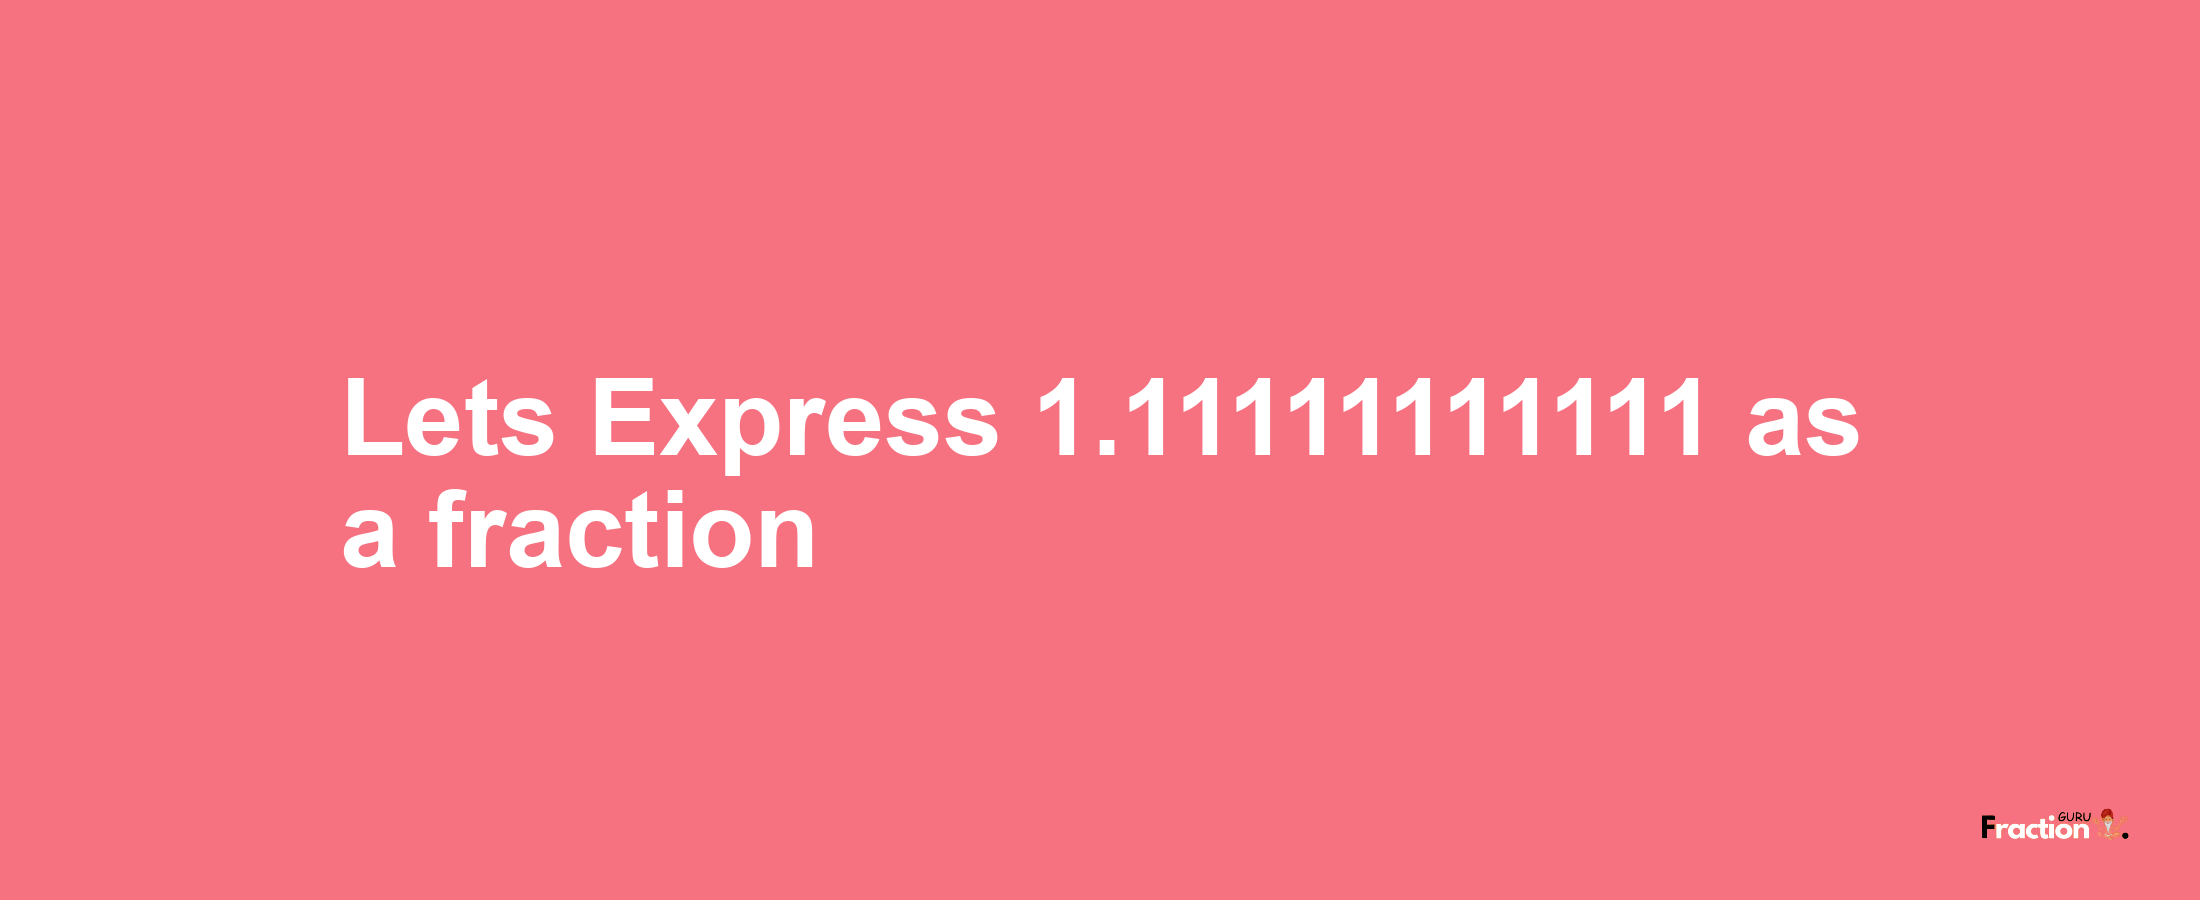 Lets Express 1.11111111111 as afraction